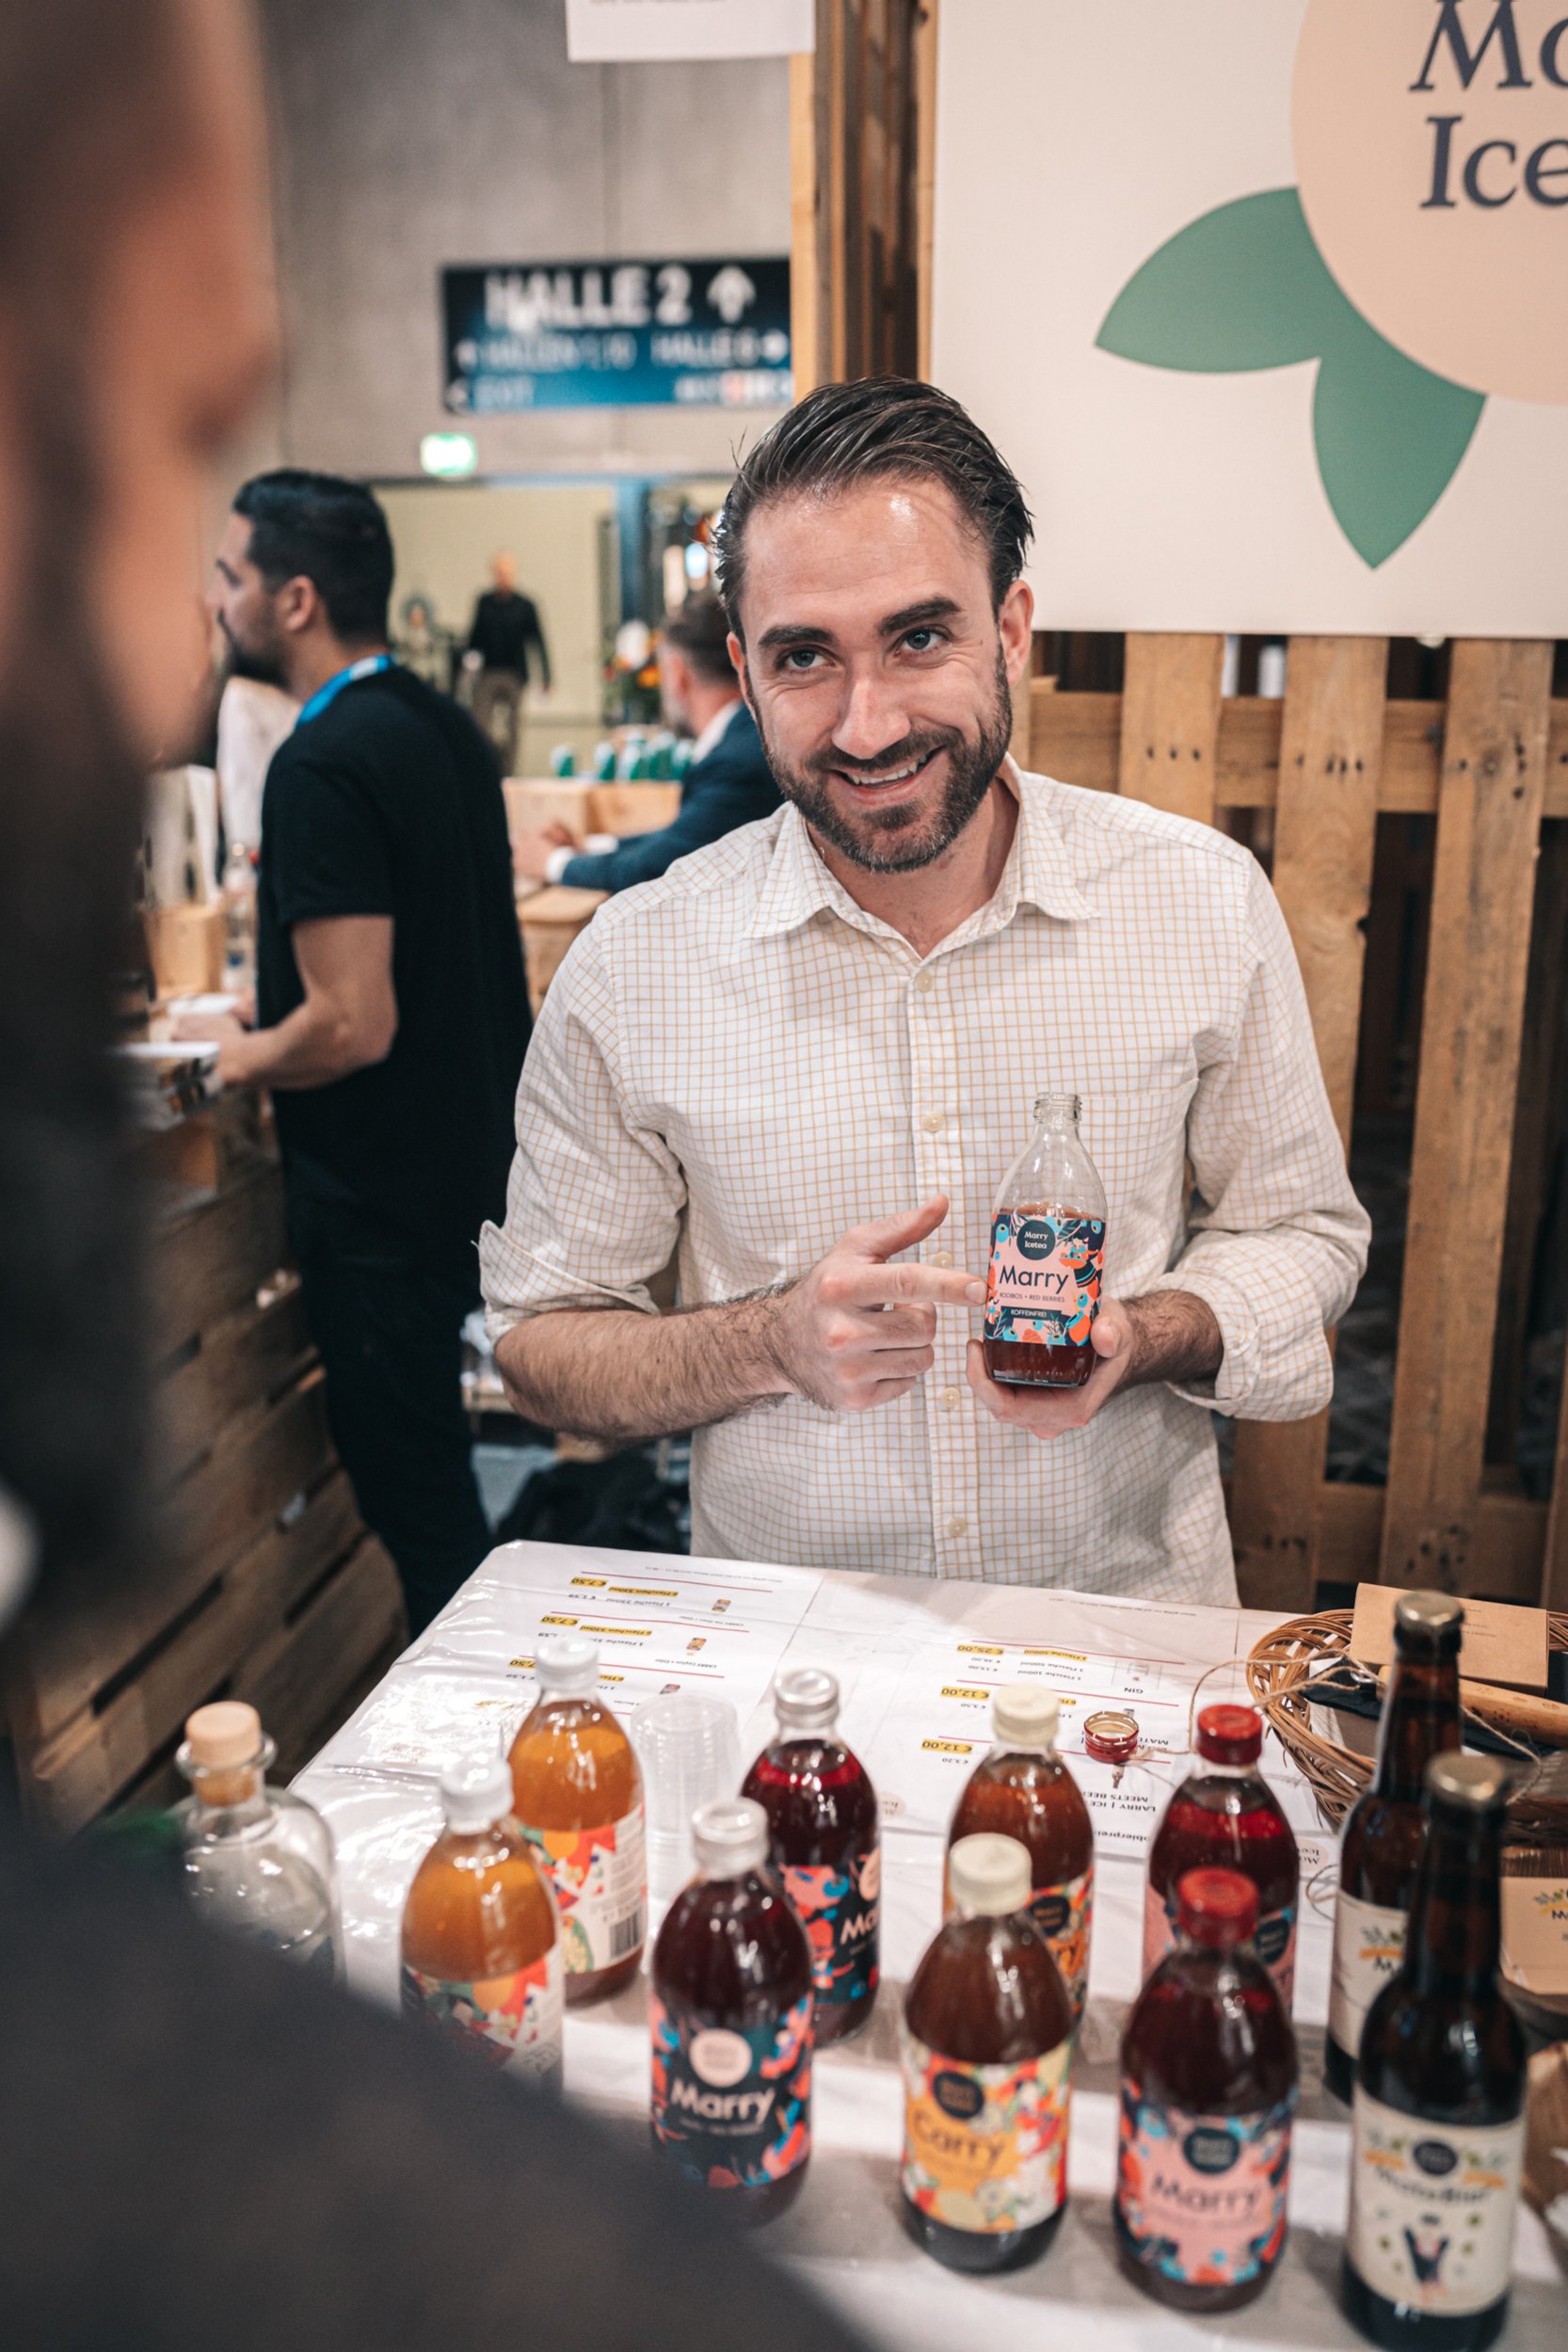 Marry Icetea at the Startup-Area 2022